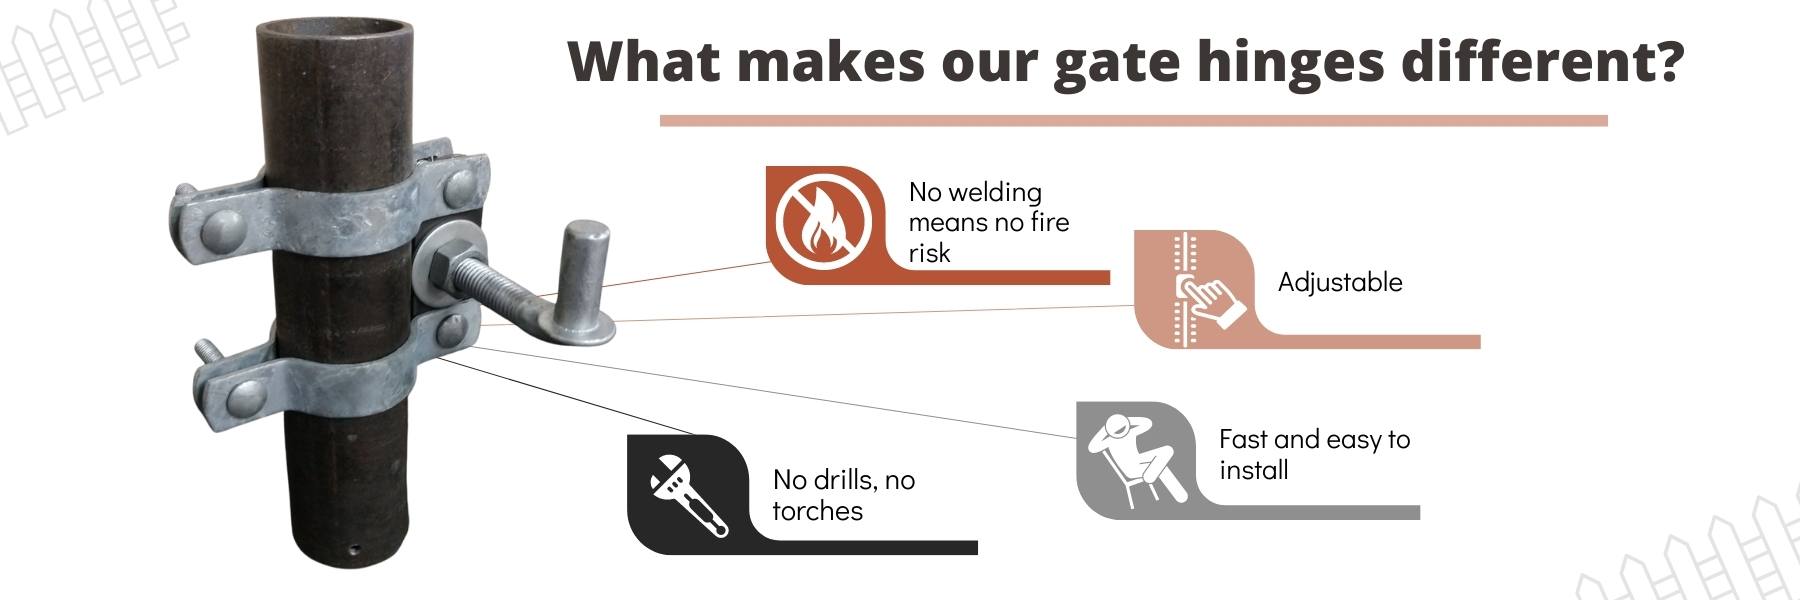 Bullet Fence Systems- what makes our gate hinges different? No welding means no fire risk, adjustable, fast and easy to install, no drills, no torches 